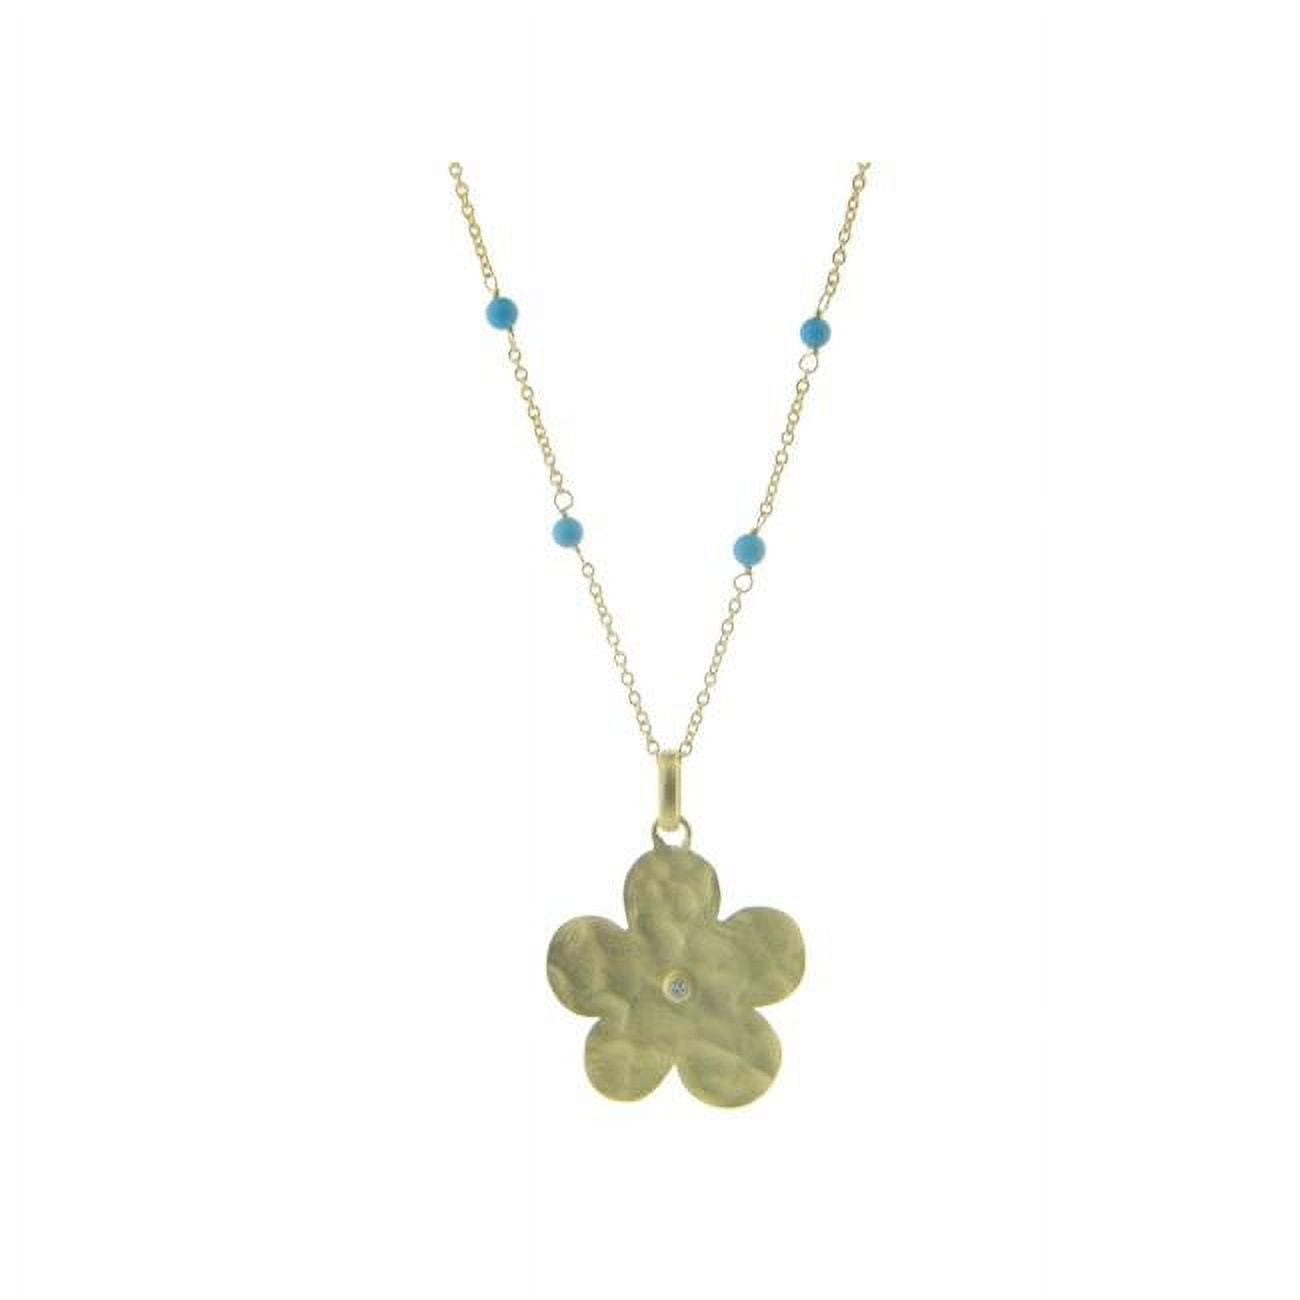 211362t 16 In. Hammered Gold Plated Sterling Silver Flower Of Life & Turquoise Stone Necklace